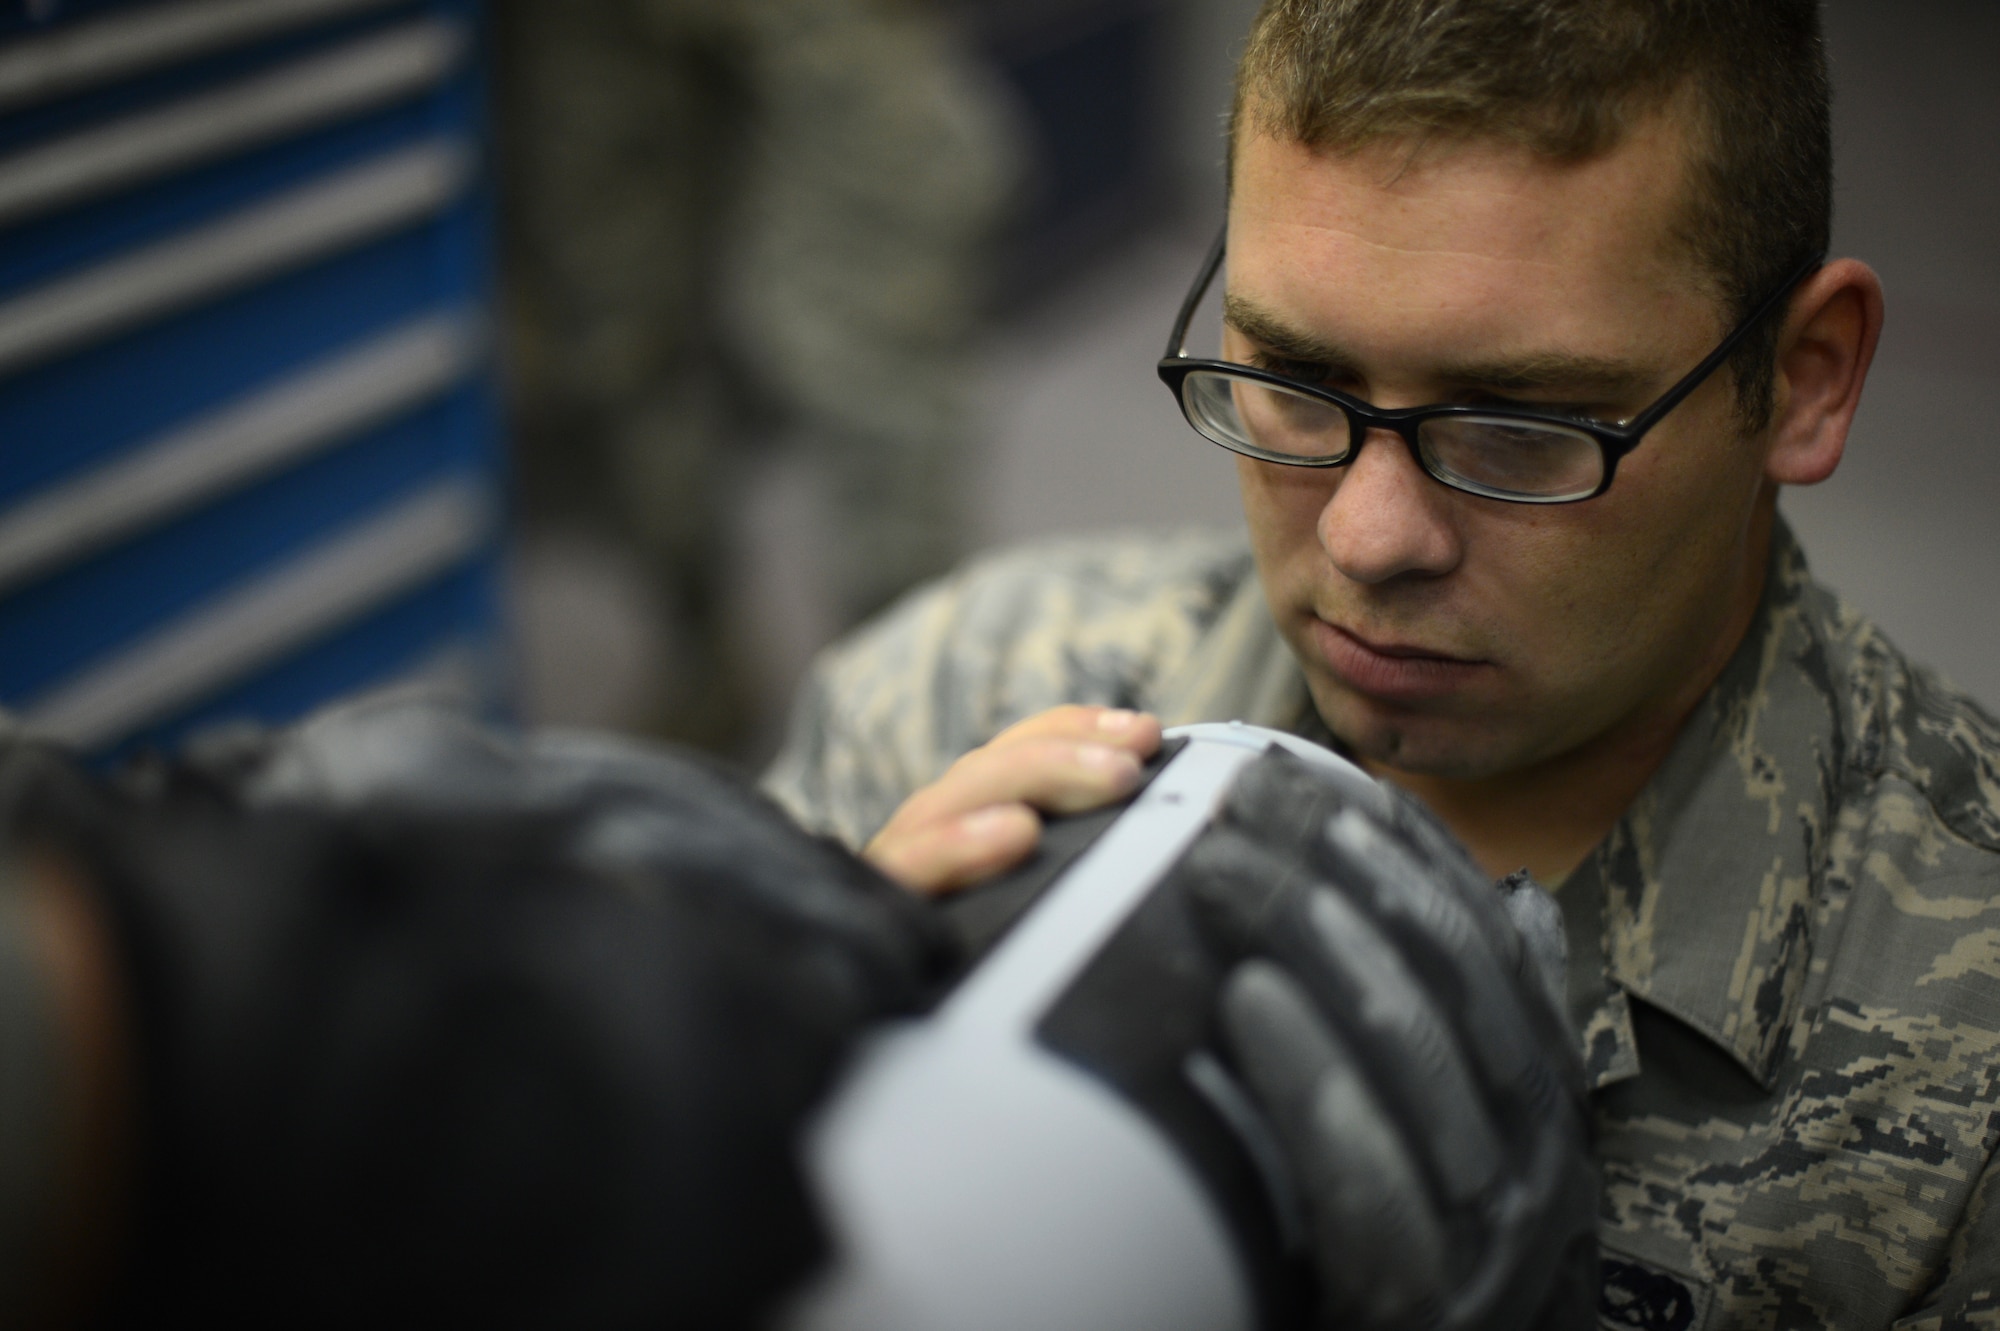 U.S. Air Force Senior Airman Daniel Devincenzo, a 52nd Equipment Maintenance Squadron precision guided munitions technician and native of Parsippany, N.J., holds a stencil in place while painting an AIM-9 sidewinder missile on Spangdahlem Air Base, Germany, Sept. 10, 2014. Airmen use stencils to precisely mark the missile with part numbers for inventory control and designated areas for mechanical parts. (U.S. Air Force photo by Senior Airman Gustavo Castillo/Released) 